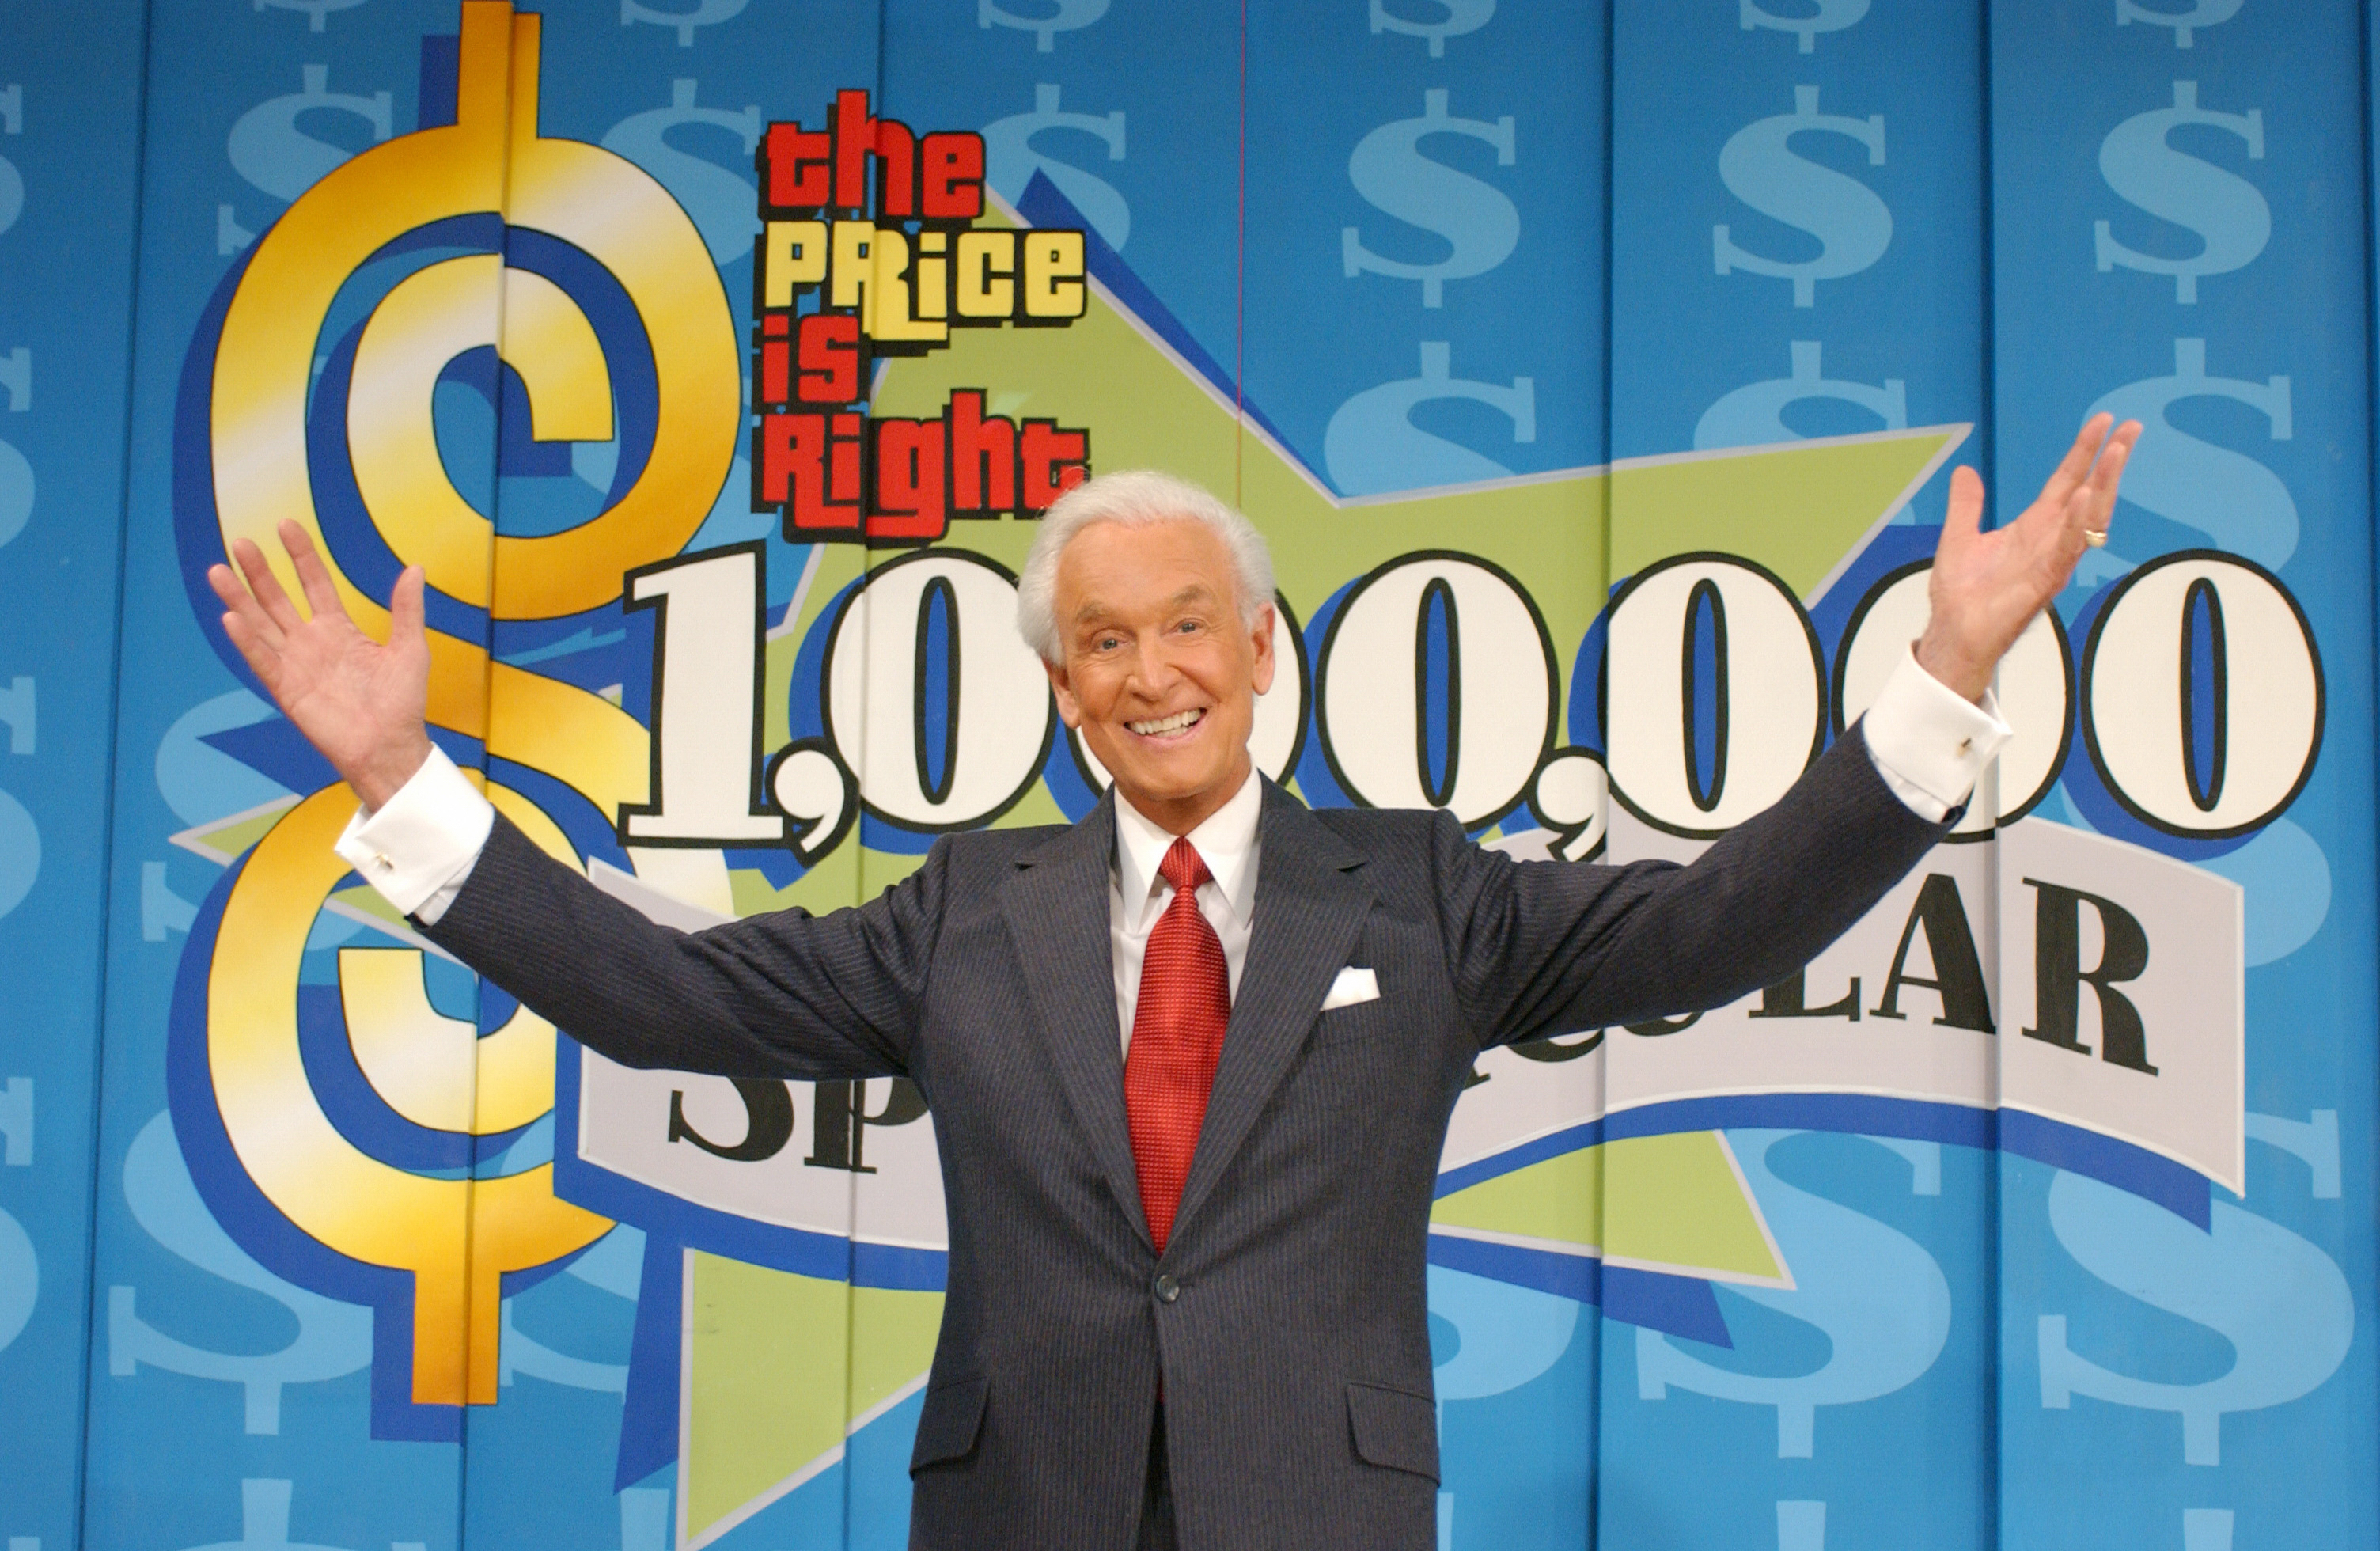 Bob Barker on the set of "The Price is Right" on January 6, 2003. | Source: Getty Images